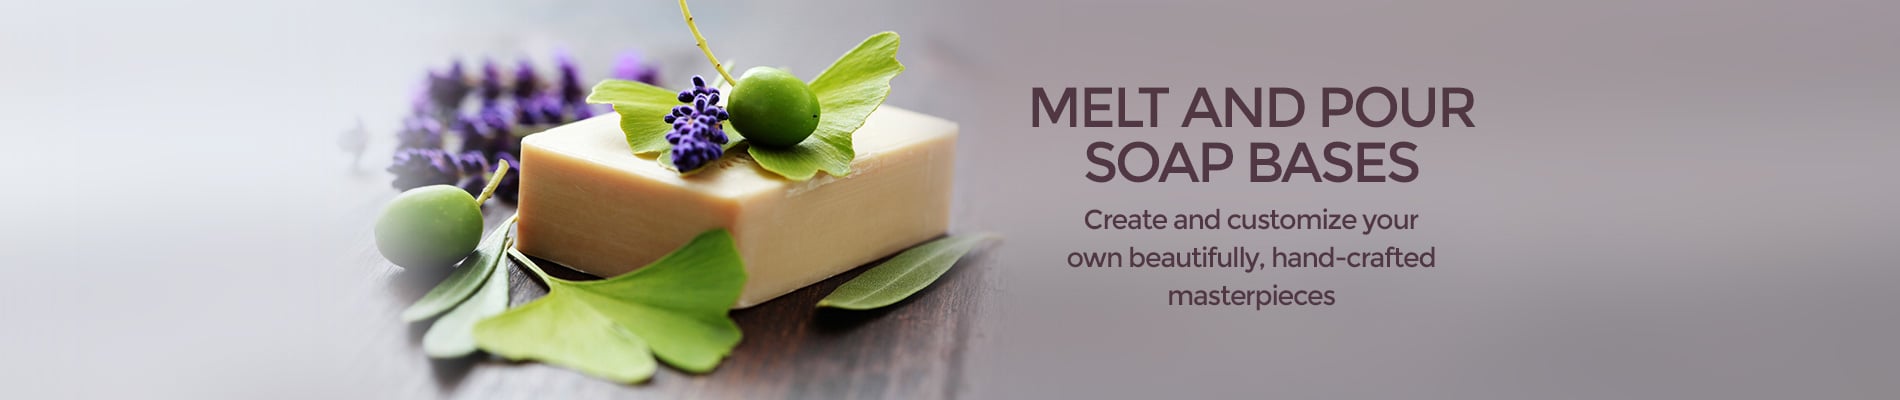 Bar of soap made with melt and pour soap base